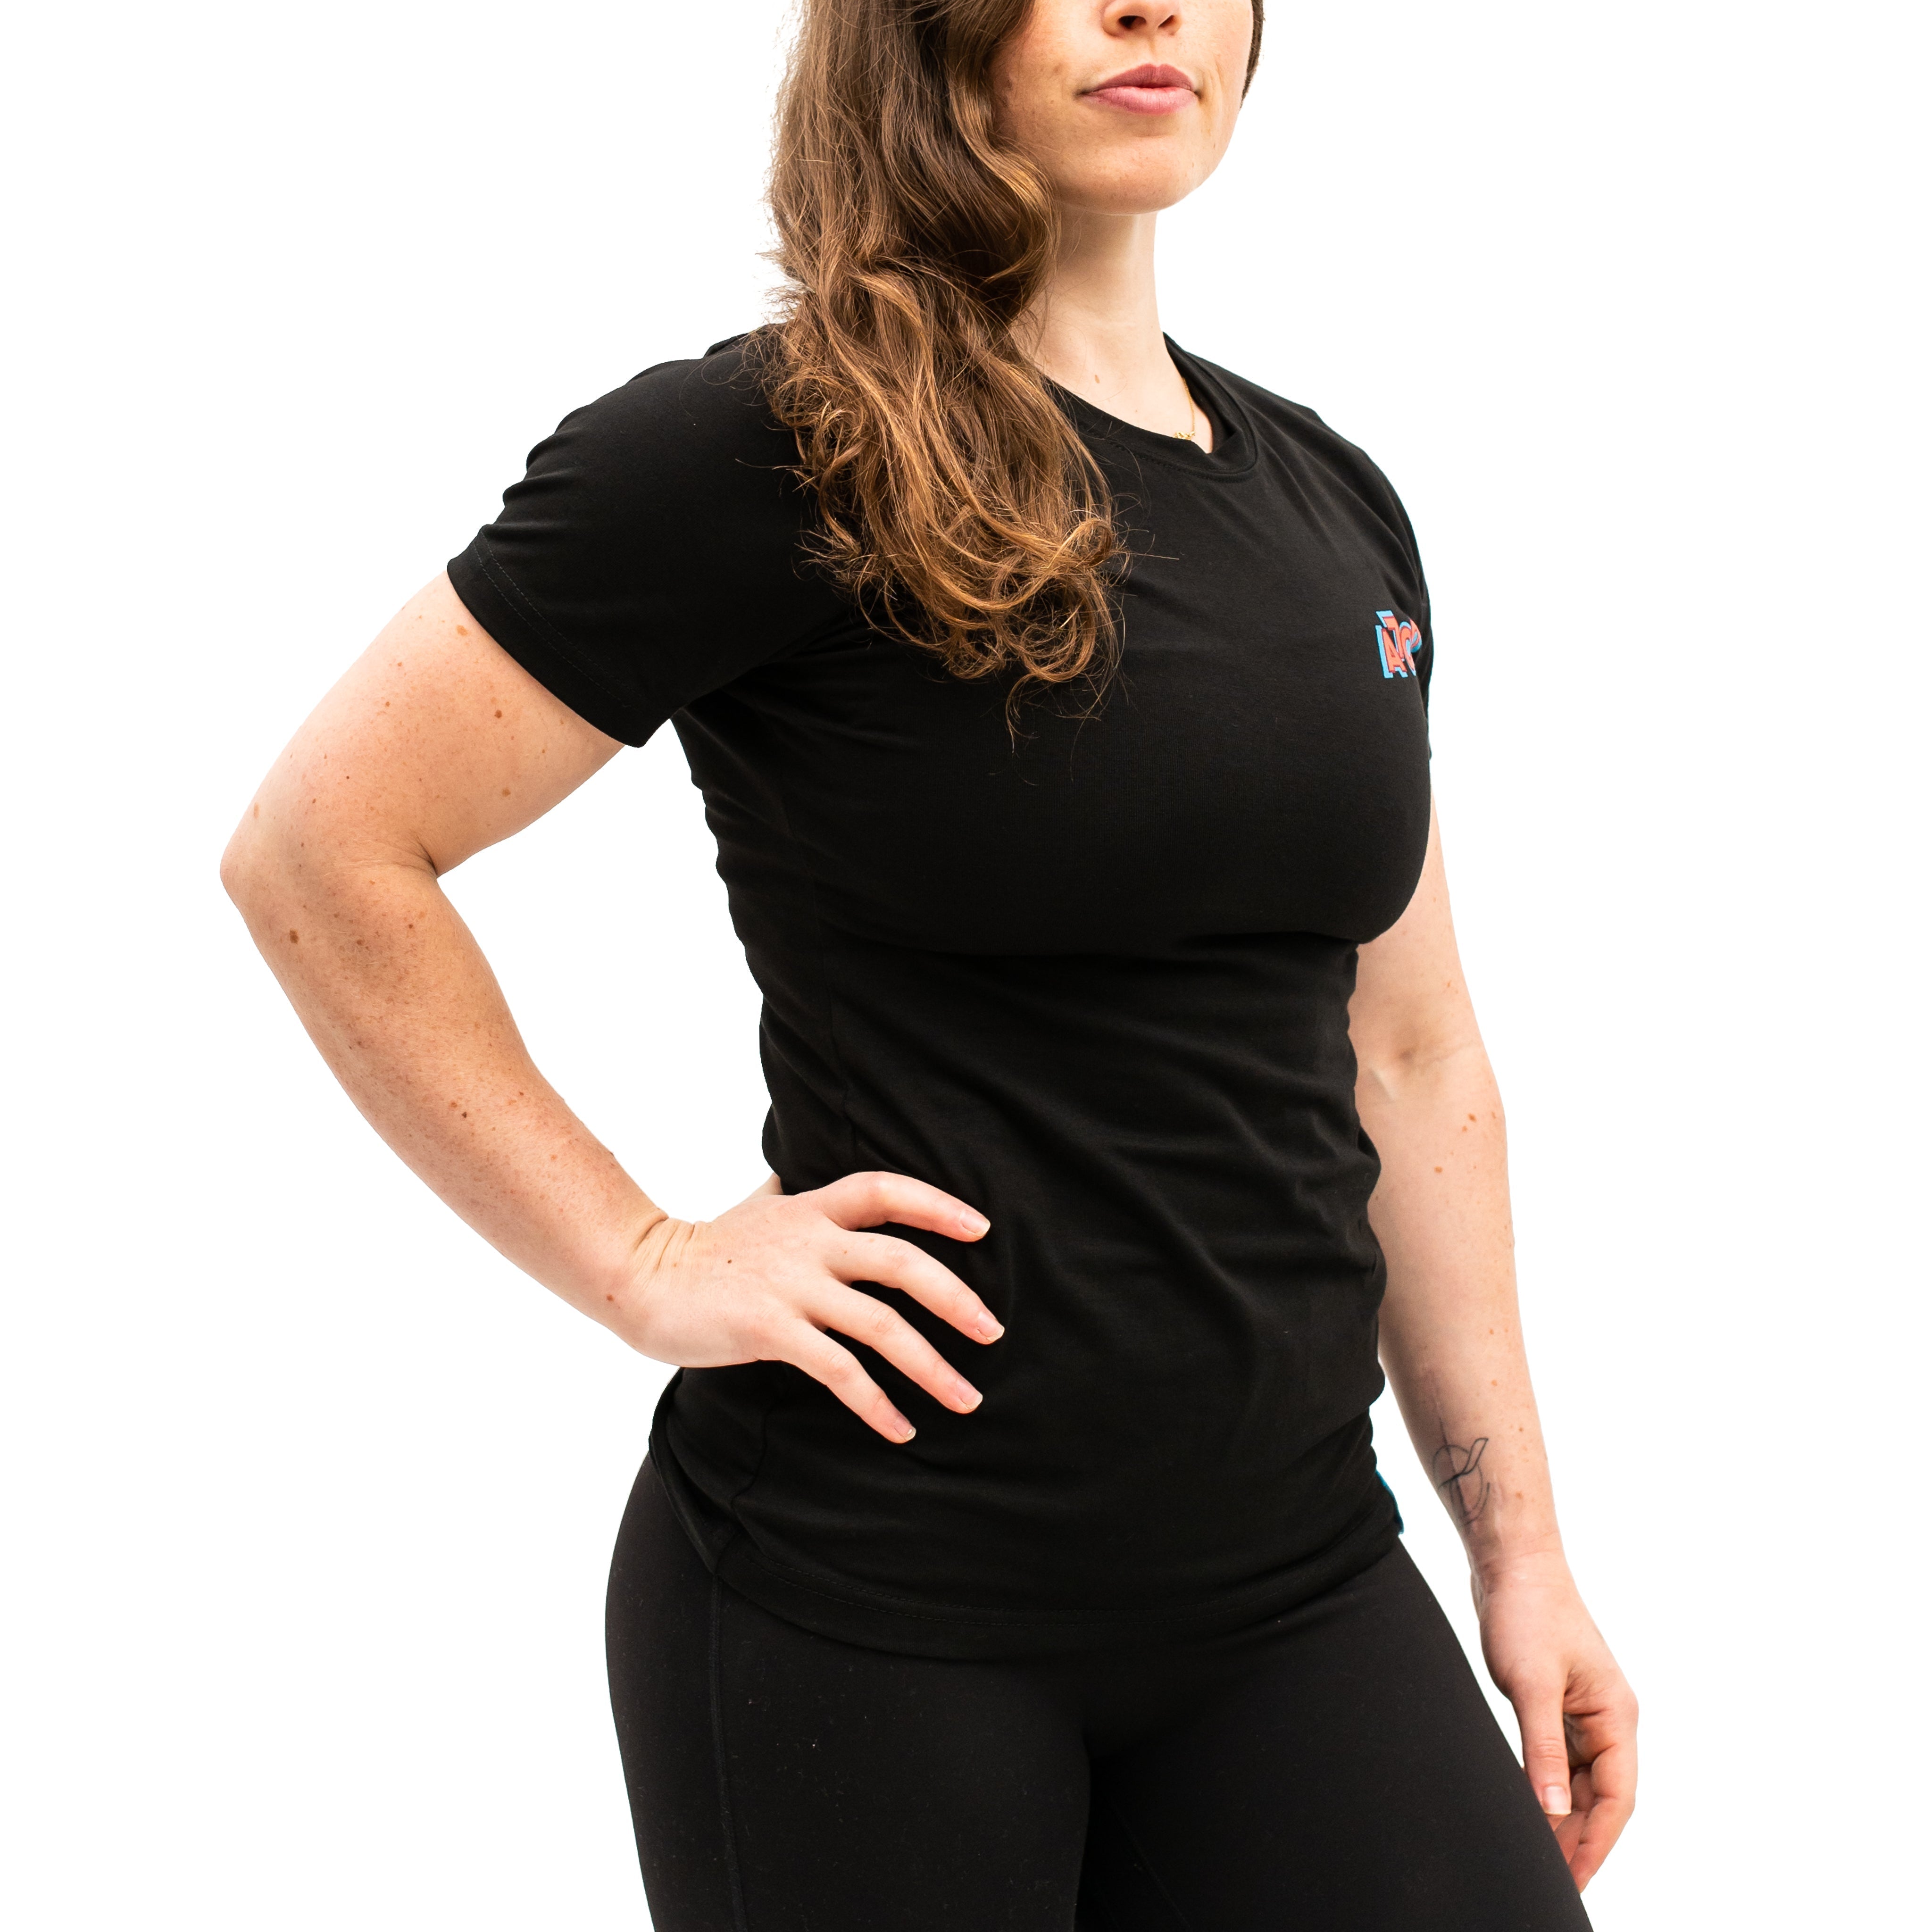 LSTS Strongman Non Bar Grip Shirt combines the dark with the fun and colourful designs to bring that pop of colour into the daily workouts. LSTS Strongman Non Bar Grip Shirt is great for strongman. Purchase LSTS Strongman Non Bar Grip Shirt from A7 UK and A7 Europe. LSTS Strongman Non Bar Grip Shirt is great for both in and out the gym. A7UK has the best strongman apparel for all your workouts. Available in UK and Europe including France, Italy, Germany, the Netherlands, Sweden and Poland.